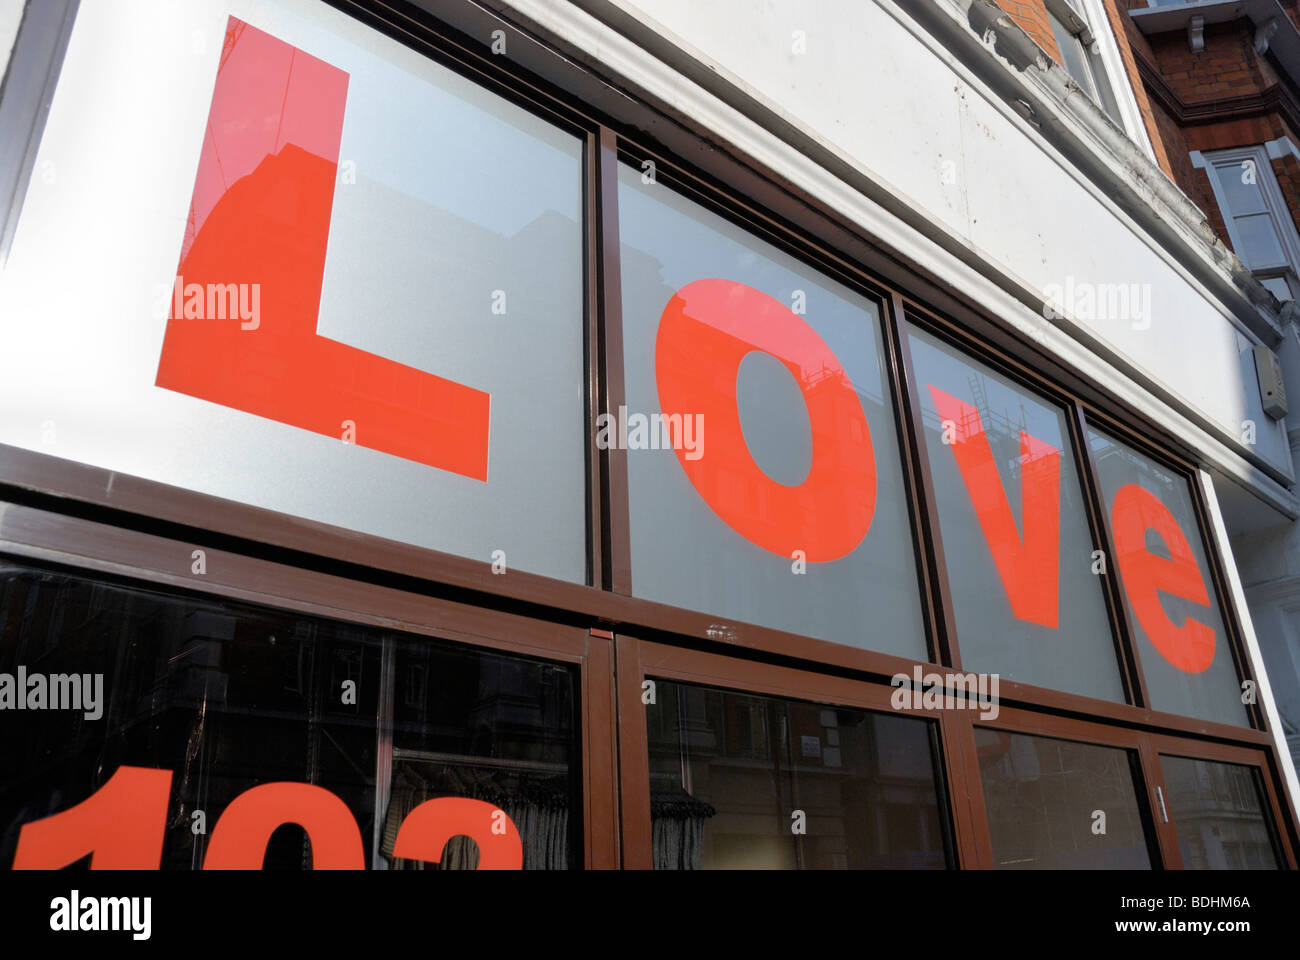 LOVE sign on London shop exterior Stock Photo